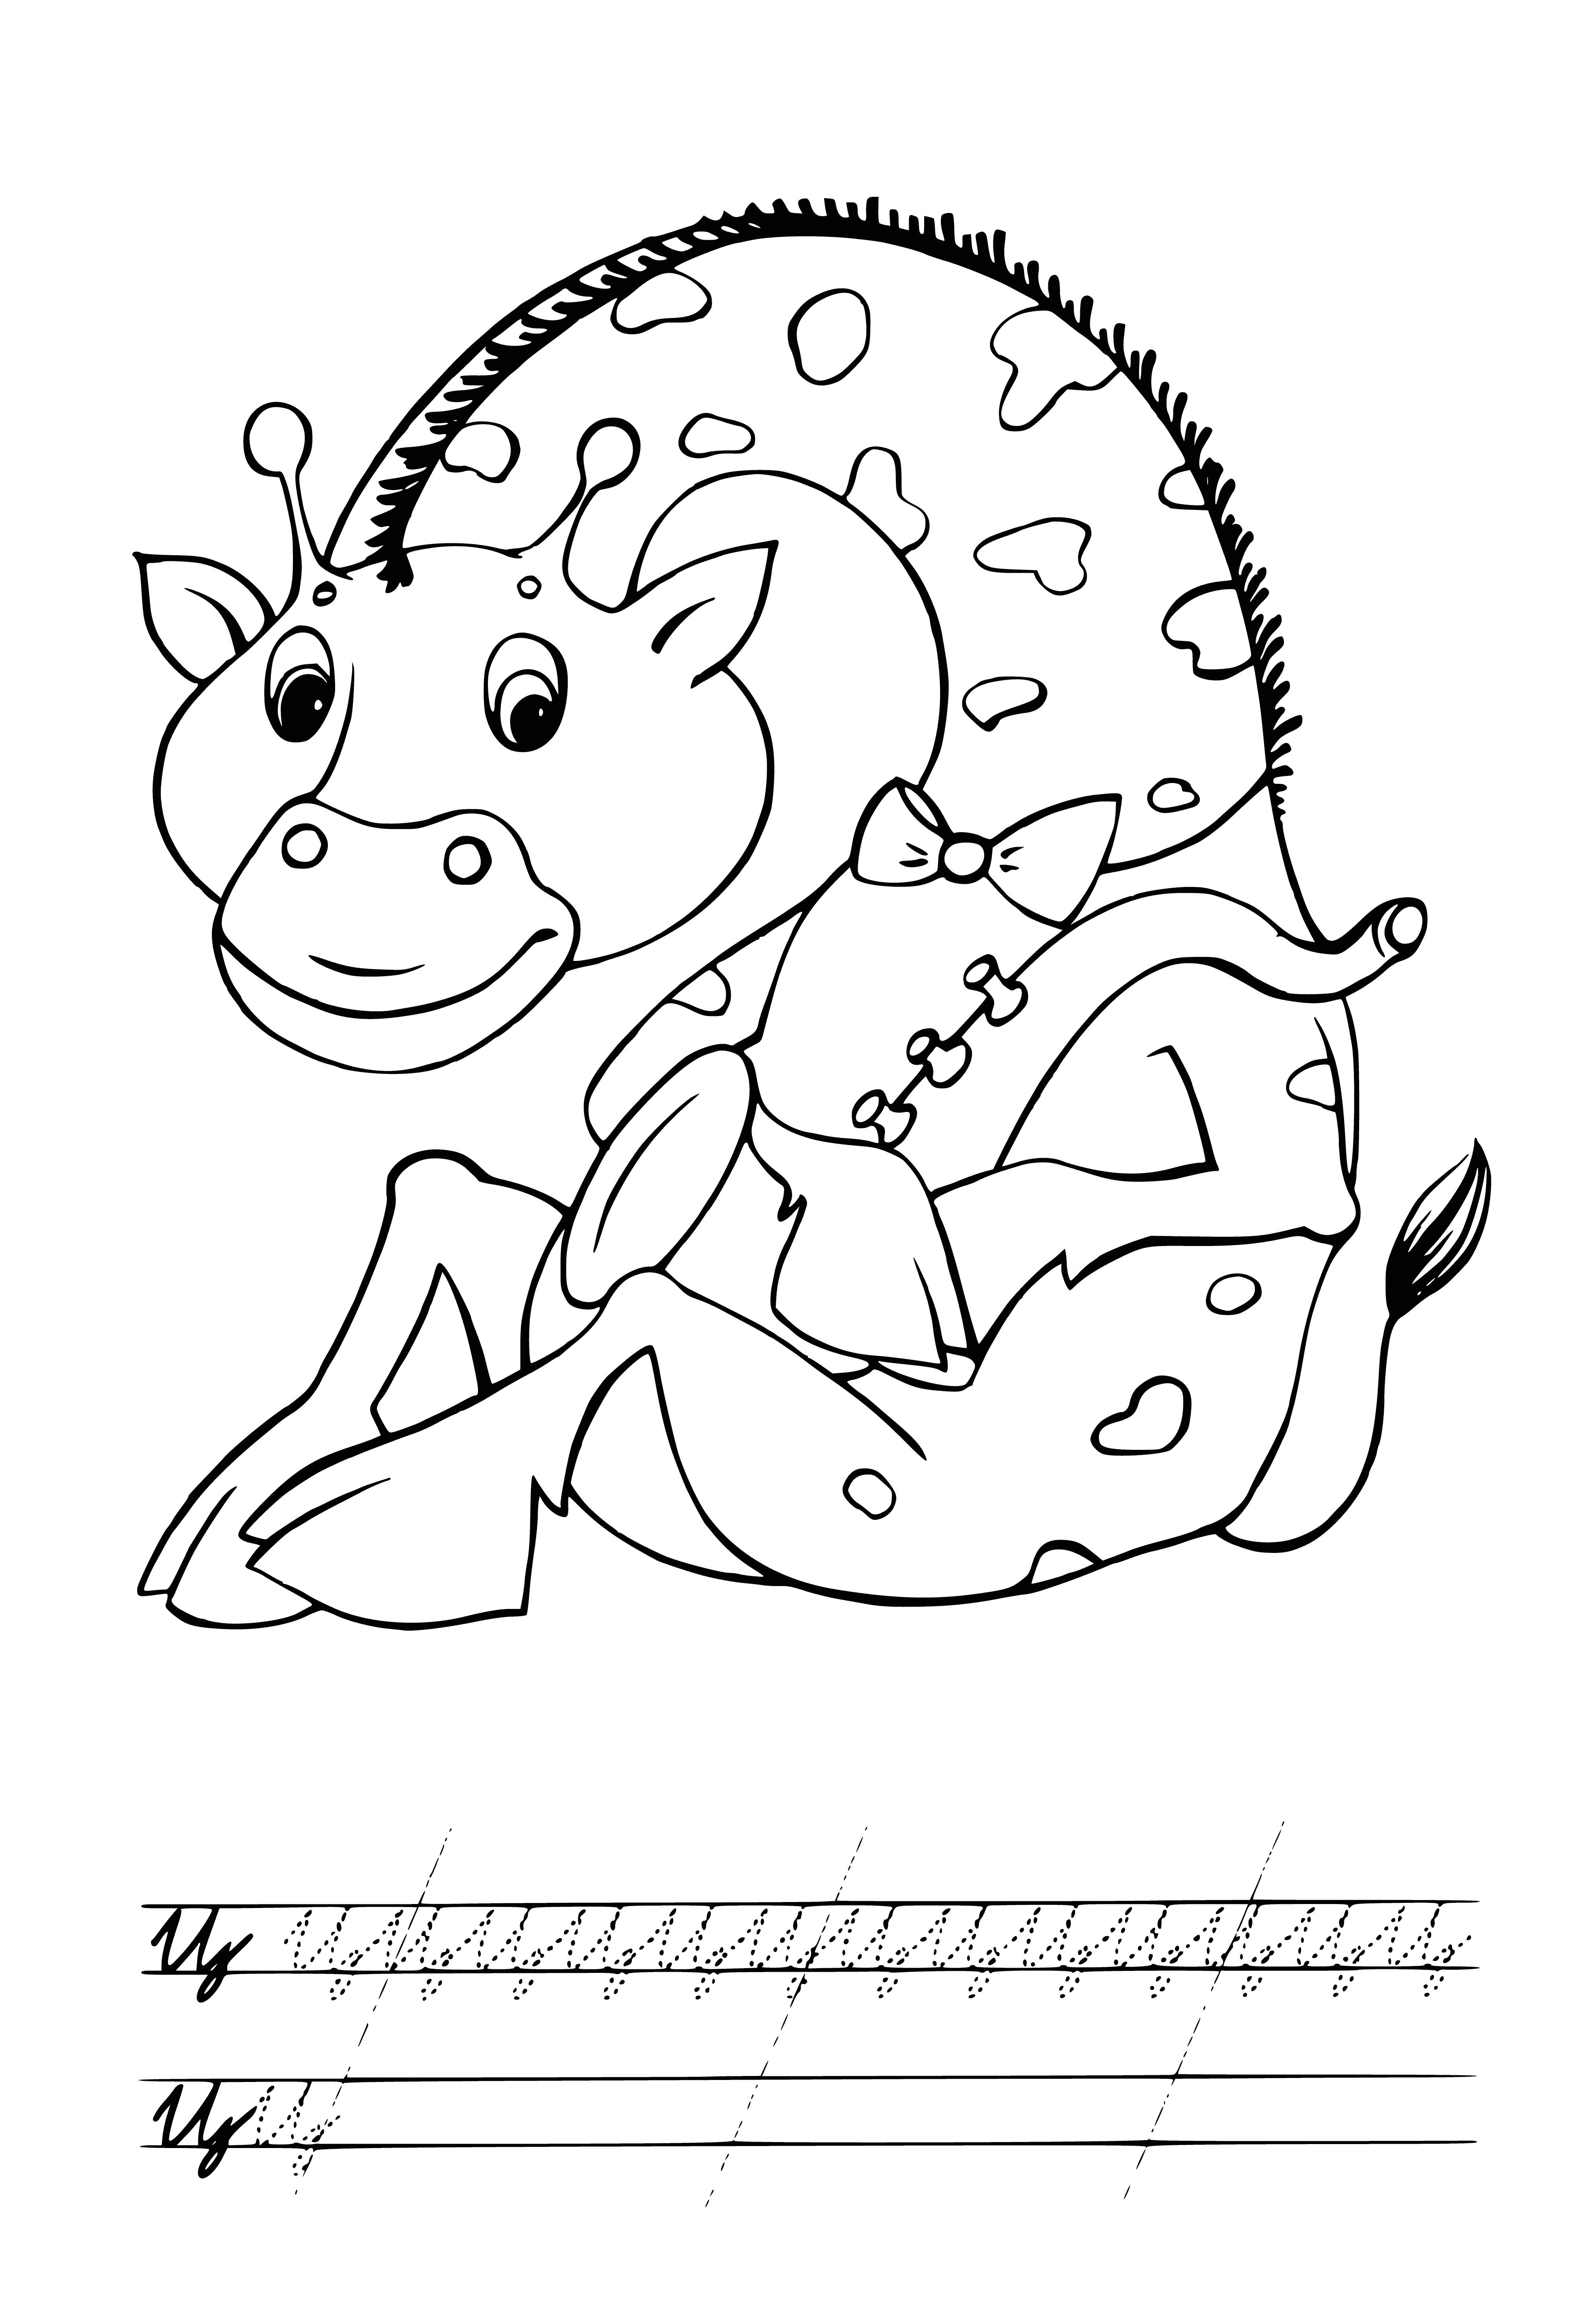 coloring page: A giraffe bends down to eat leaves from a tree, with light brown spots on its tan fur and closed eyes. #coloringpage